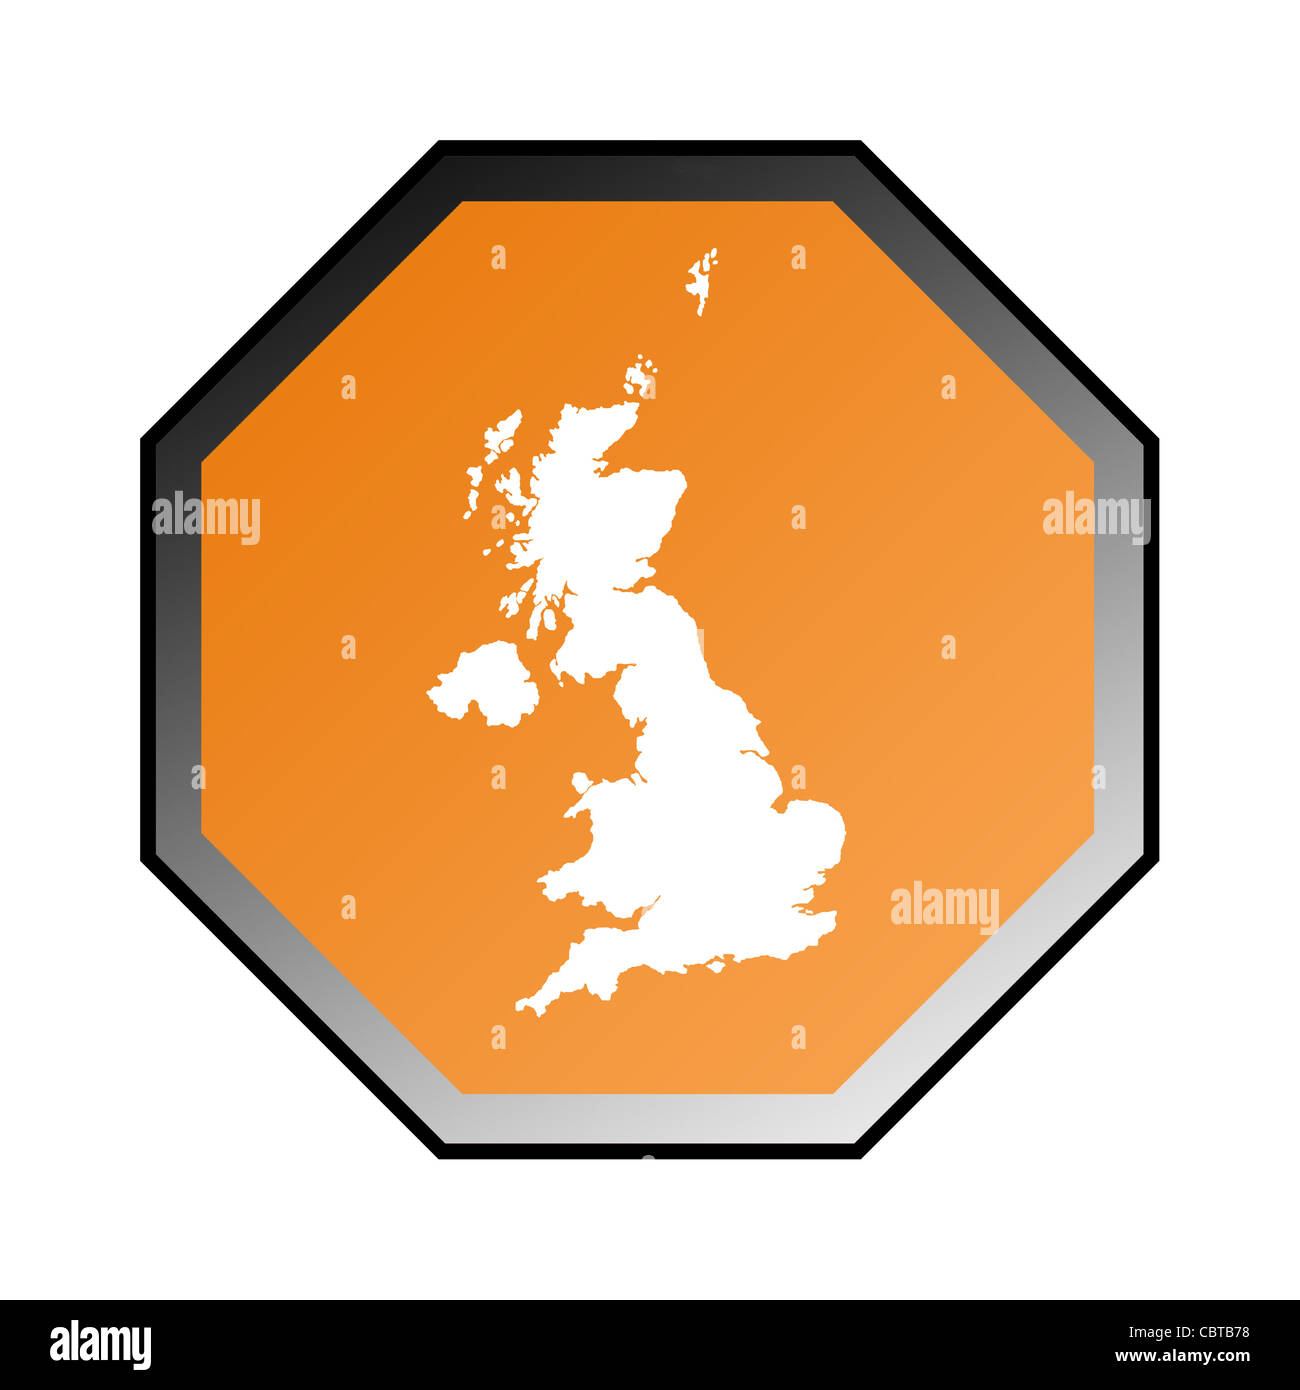 England or United Kingdom road sign isolated on a white background. Stock Photo